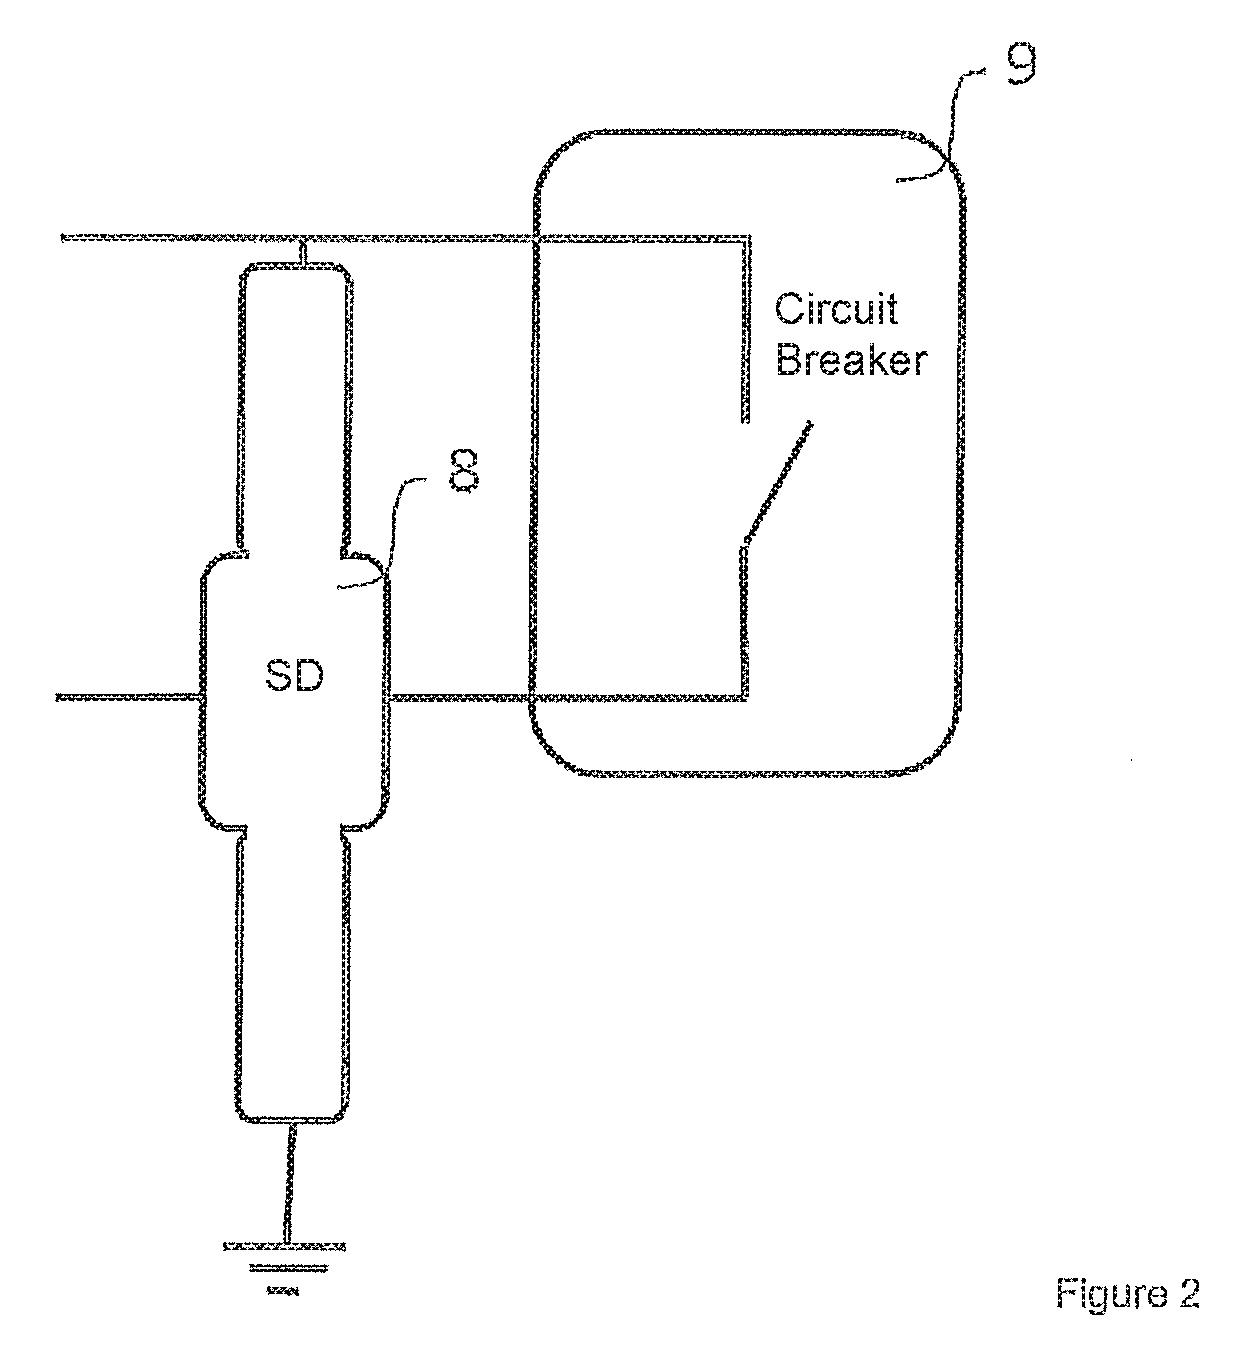 Voltage and/or current sensing device for low-, medium- or high voltage switching devices